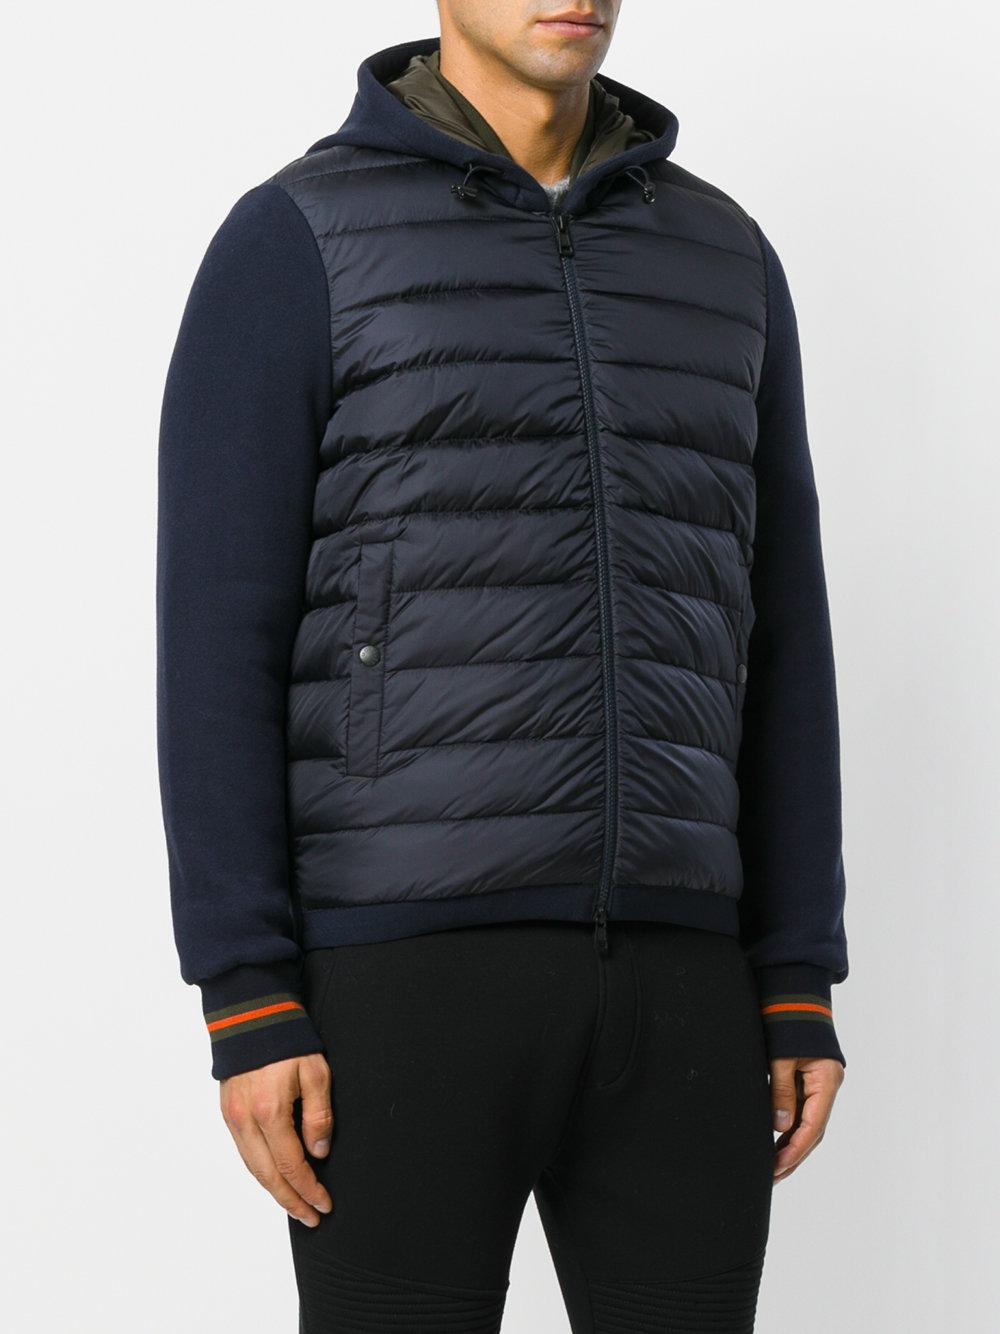 Moncler Cotton Padded Front Zip Sweatshirt in Blue for Men - Lyst